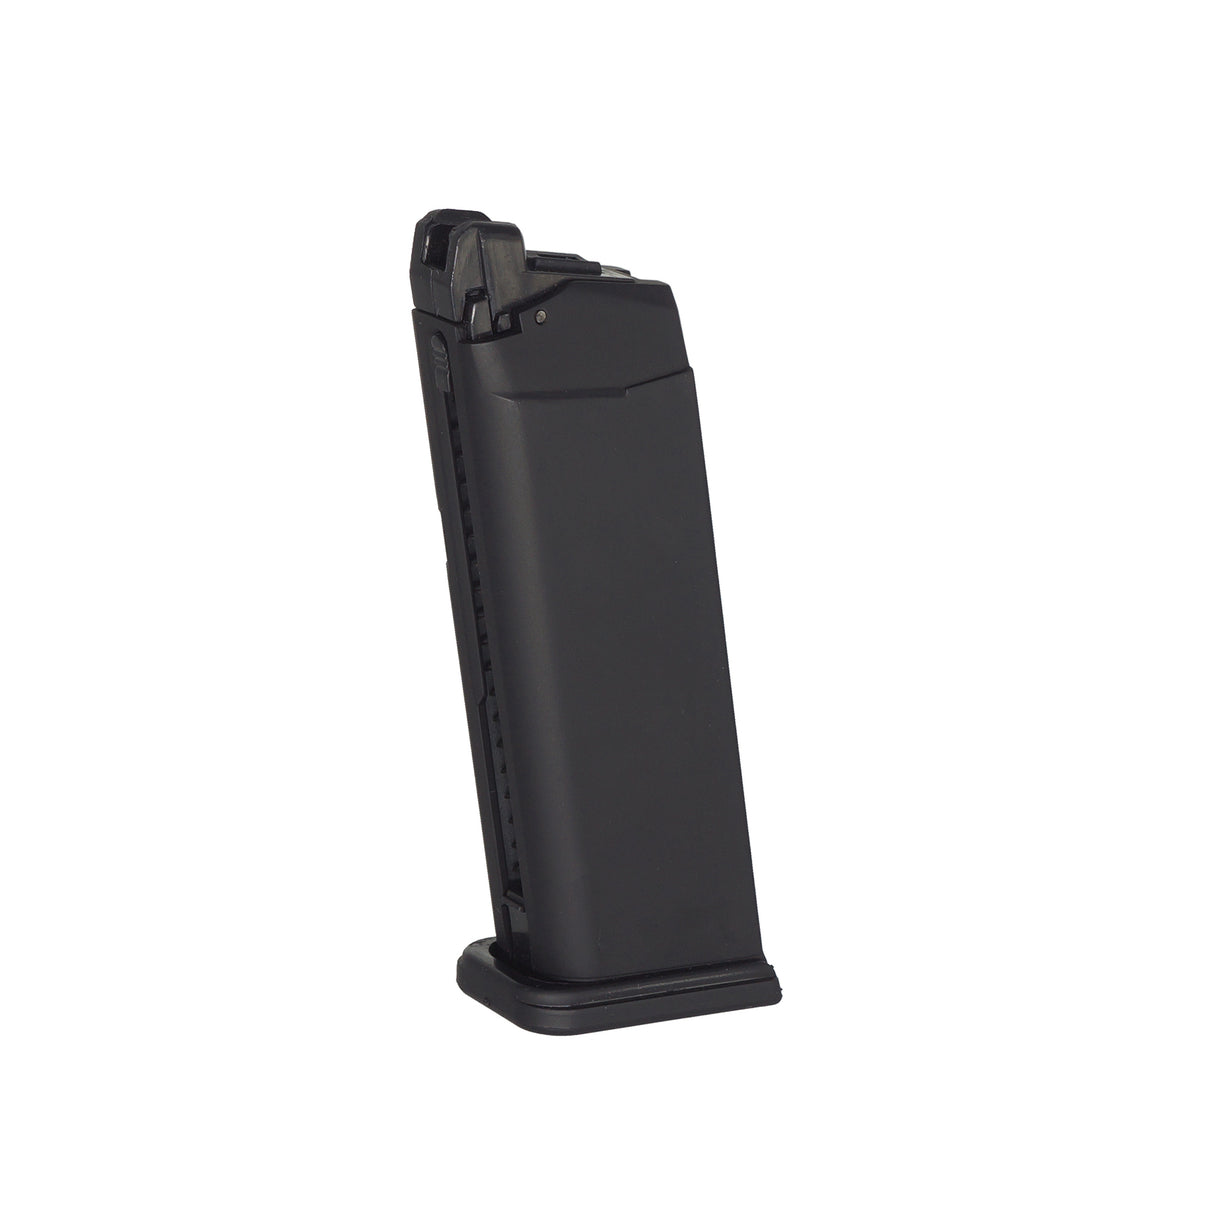 Double Bell 24 Round Green Gas Magazine for G19 GBB Pistol ( 772J )